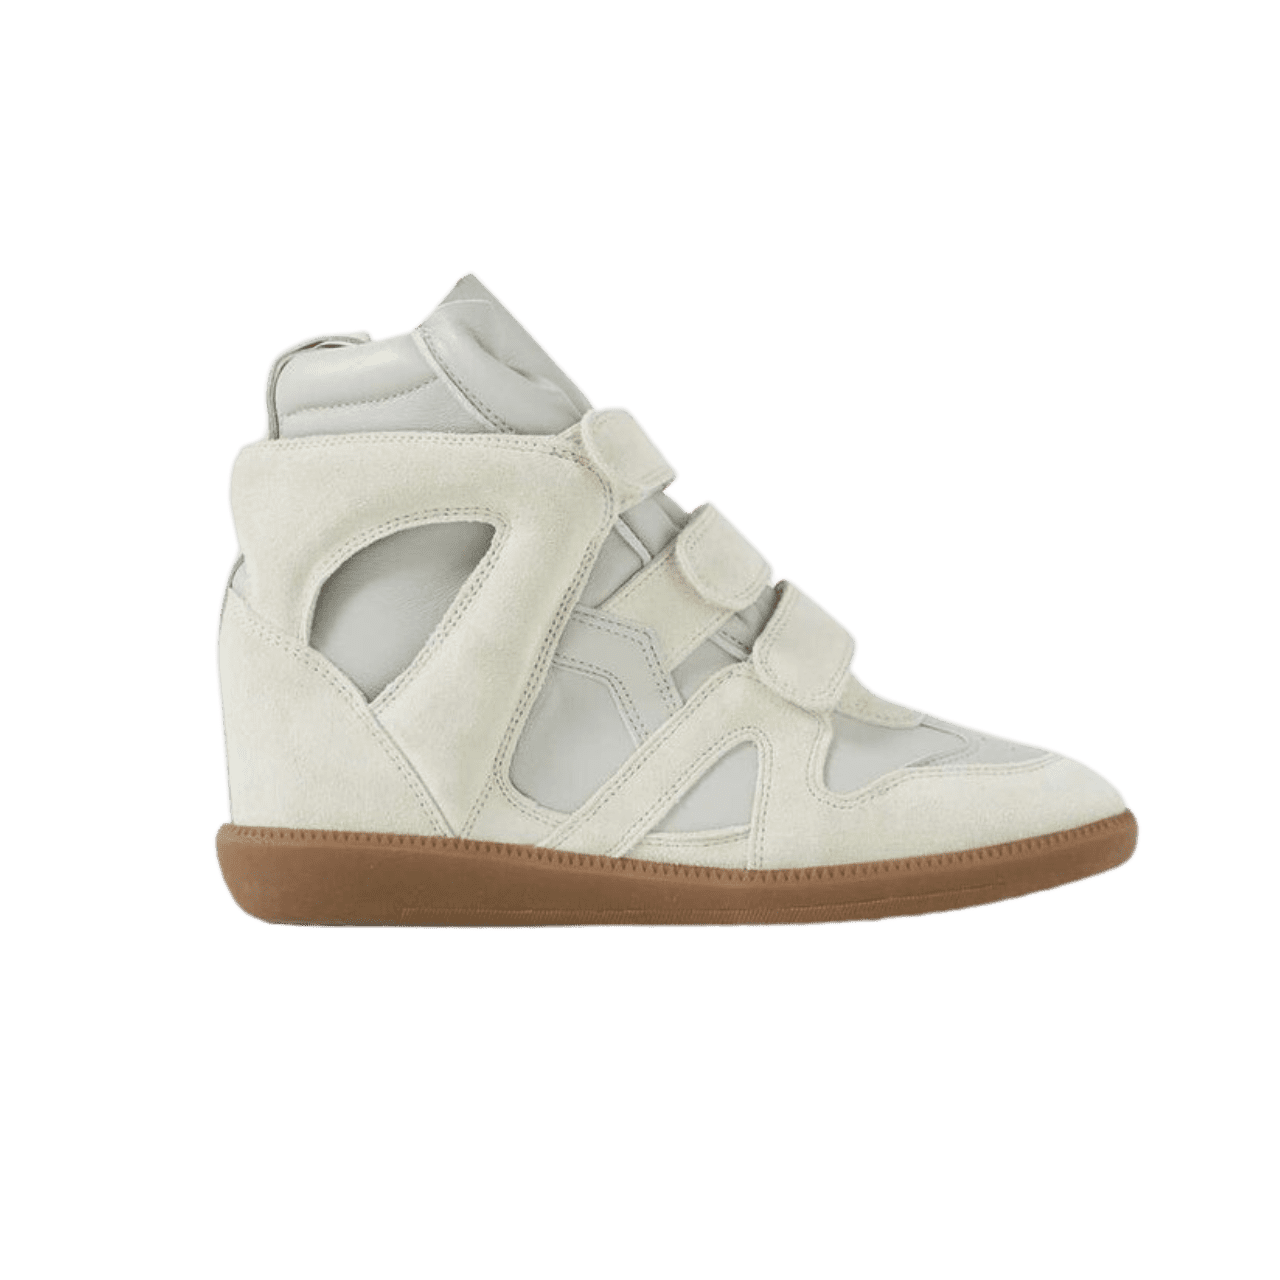 Isabel Marant Buckee suede and leather wedge sneakers